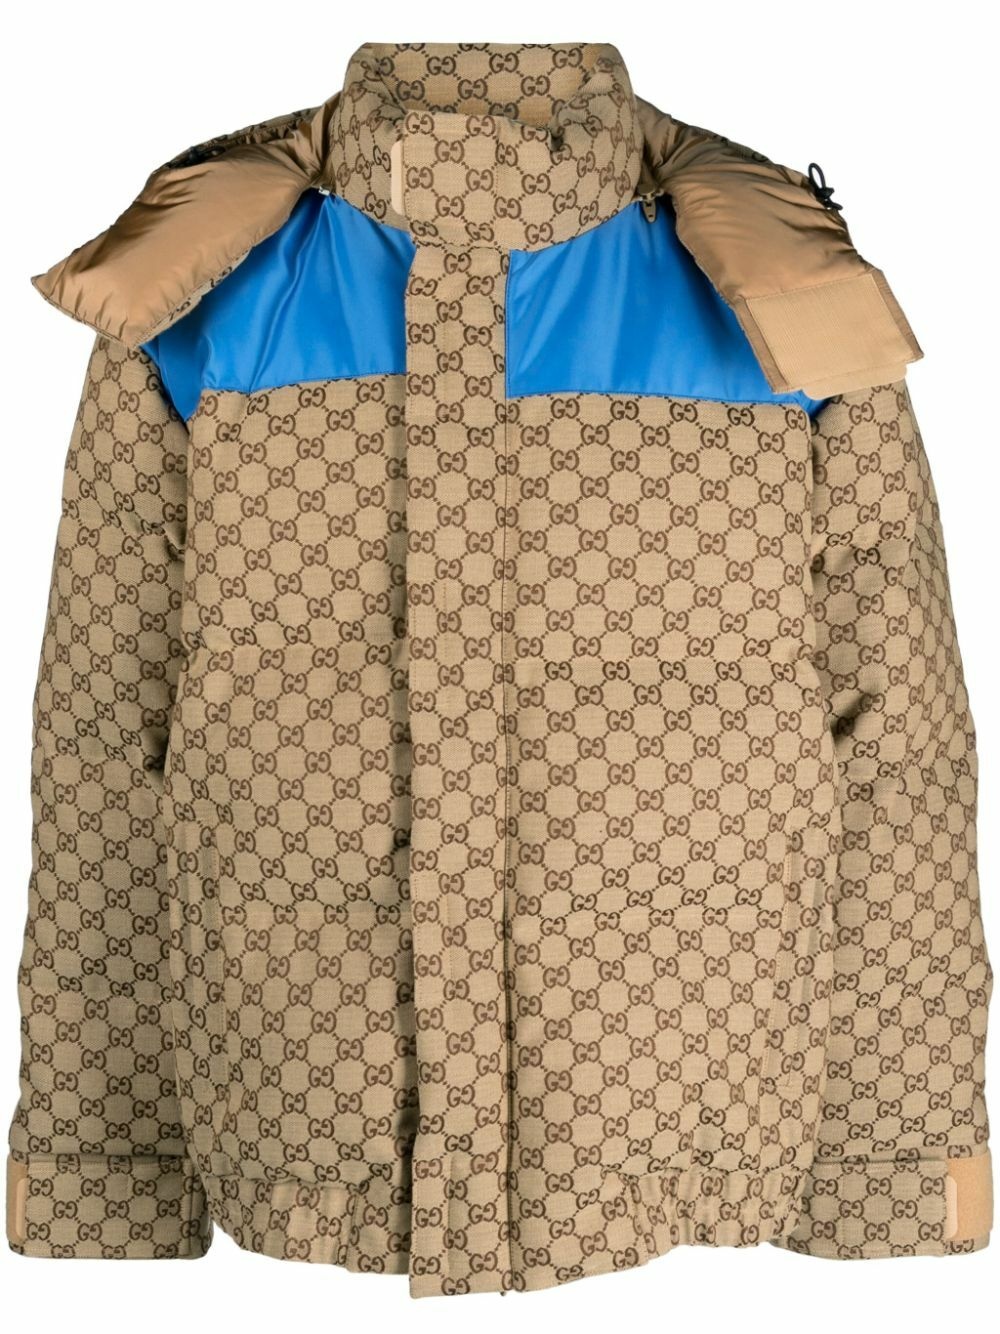 GG canvas down vest with detachable hood in beige and blue